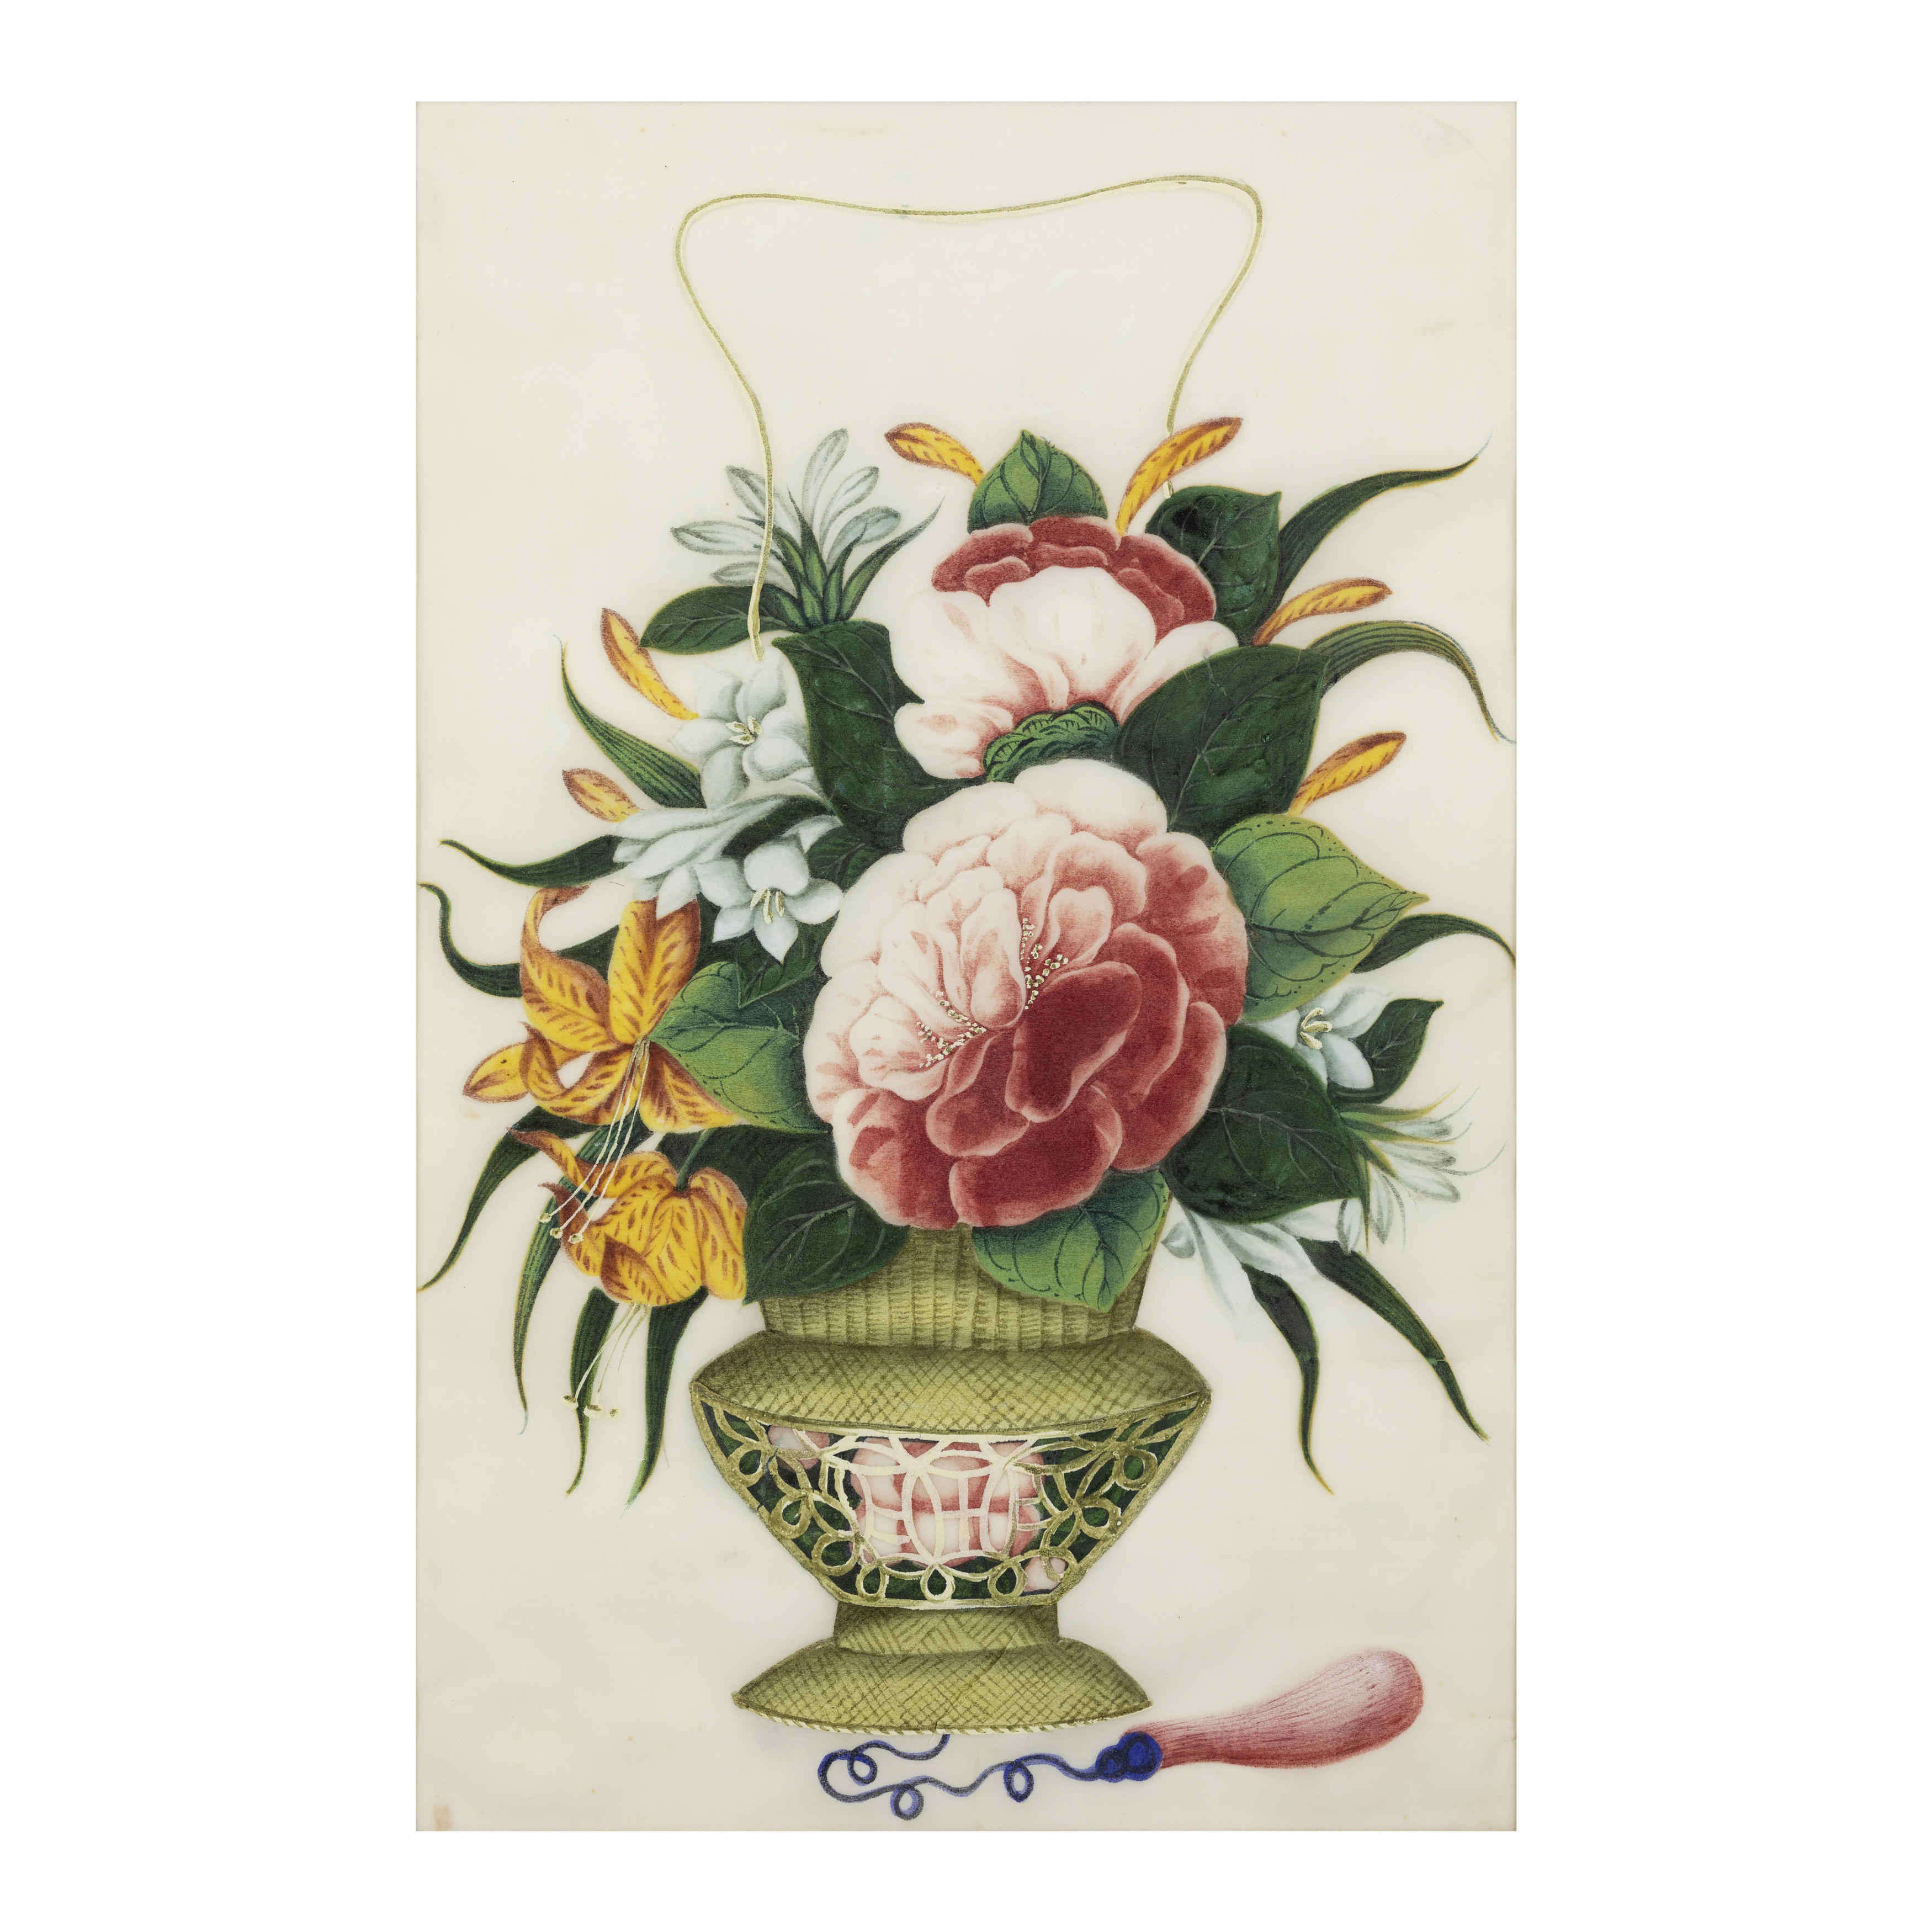 Chinese Guangdong (Canton) Export School, 19th century 'Baskets of flowers' Gouache on pith pap... - Image 2 of 3